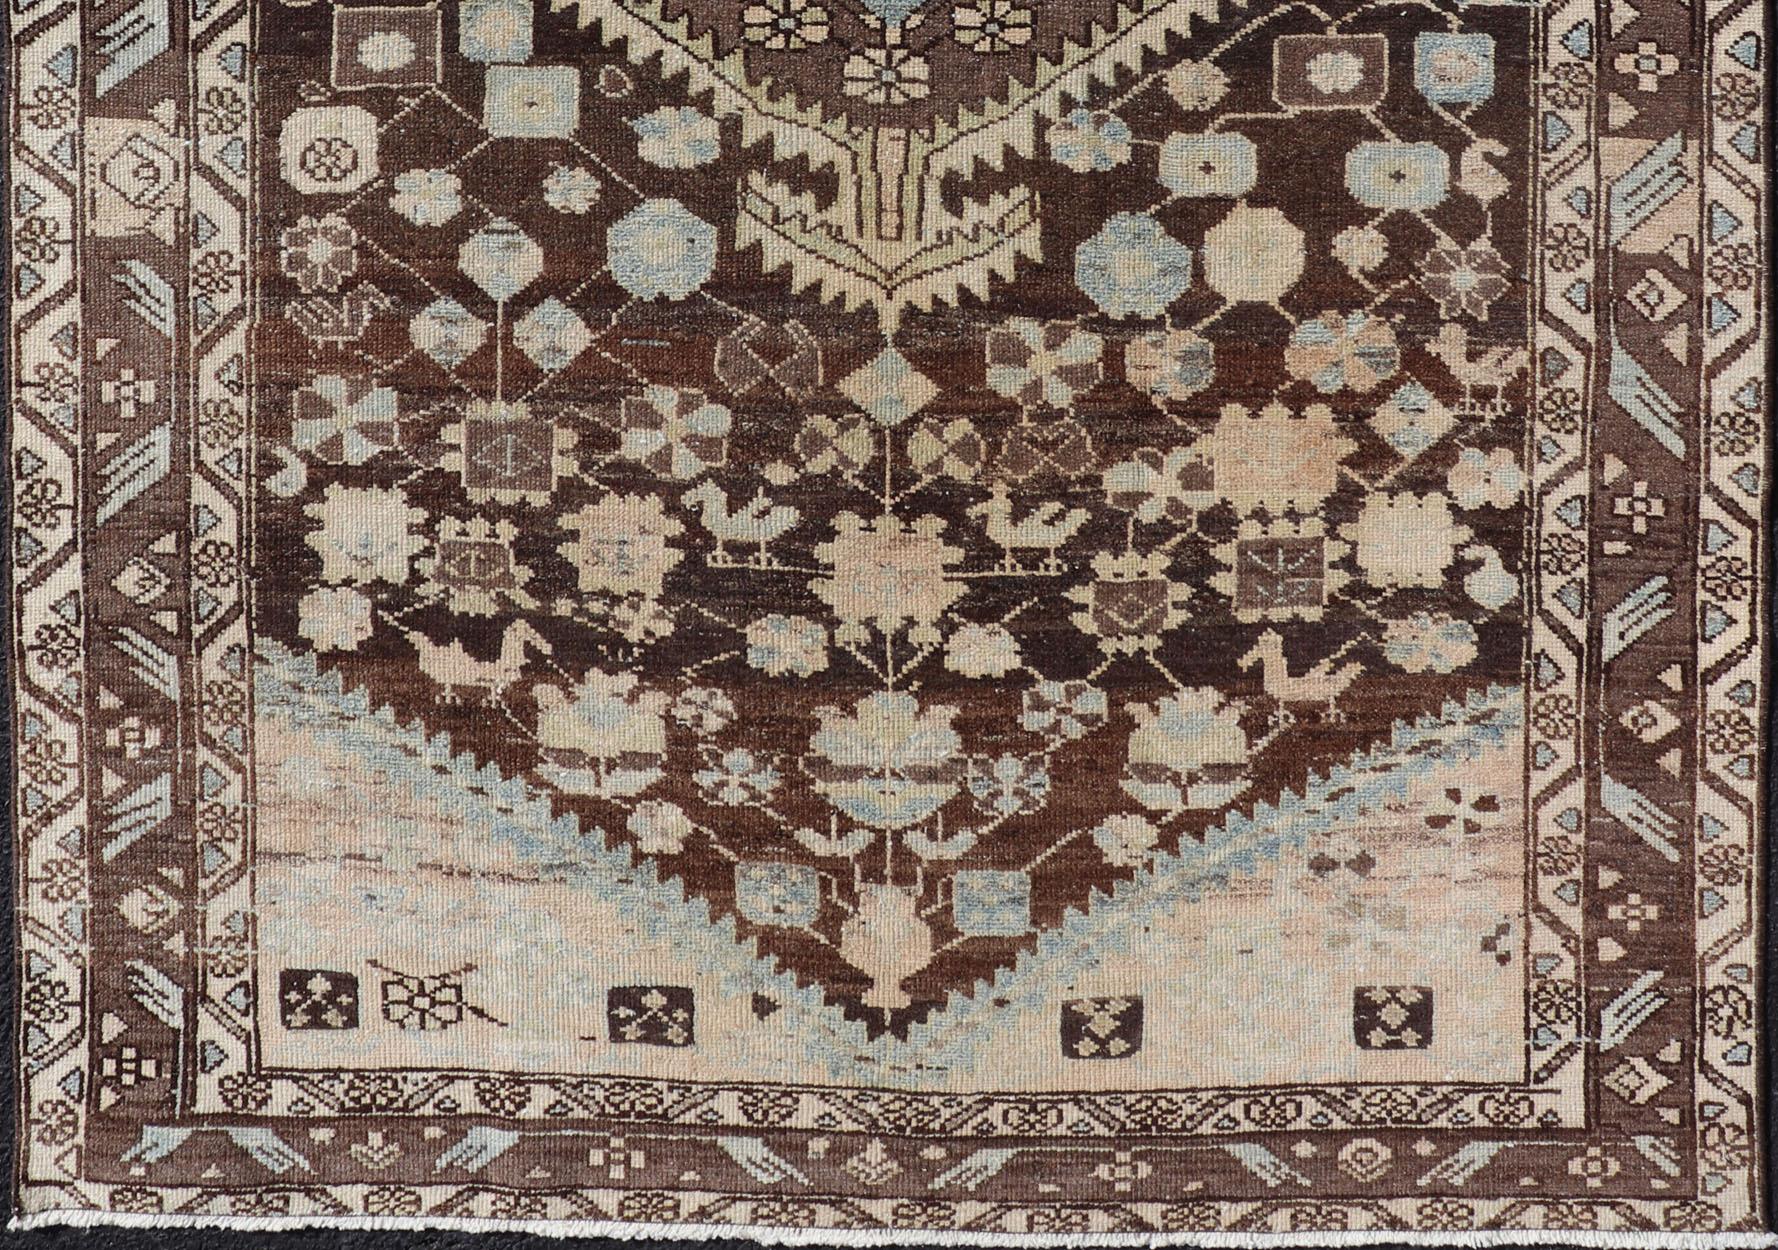 Floral design malayer vintage rug in brown and light grayish-blue color tones, Keivan Woven Arts / rug EMB-9547-P13075, origin / type: Iran / Hamedan, circa 1930

This beautiful vintage malayer rug from Persia features an elaborate medallion